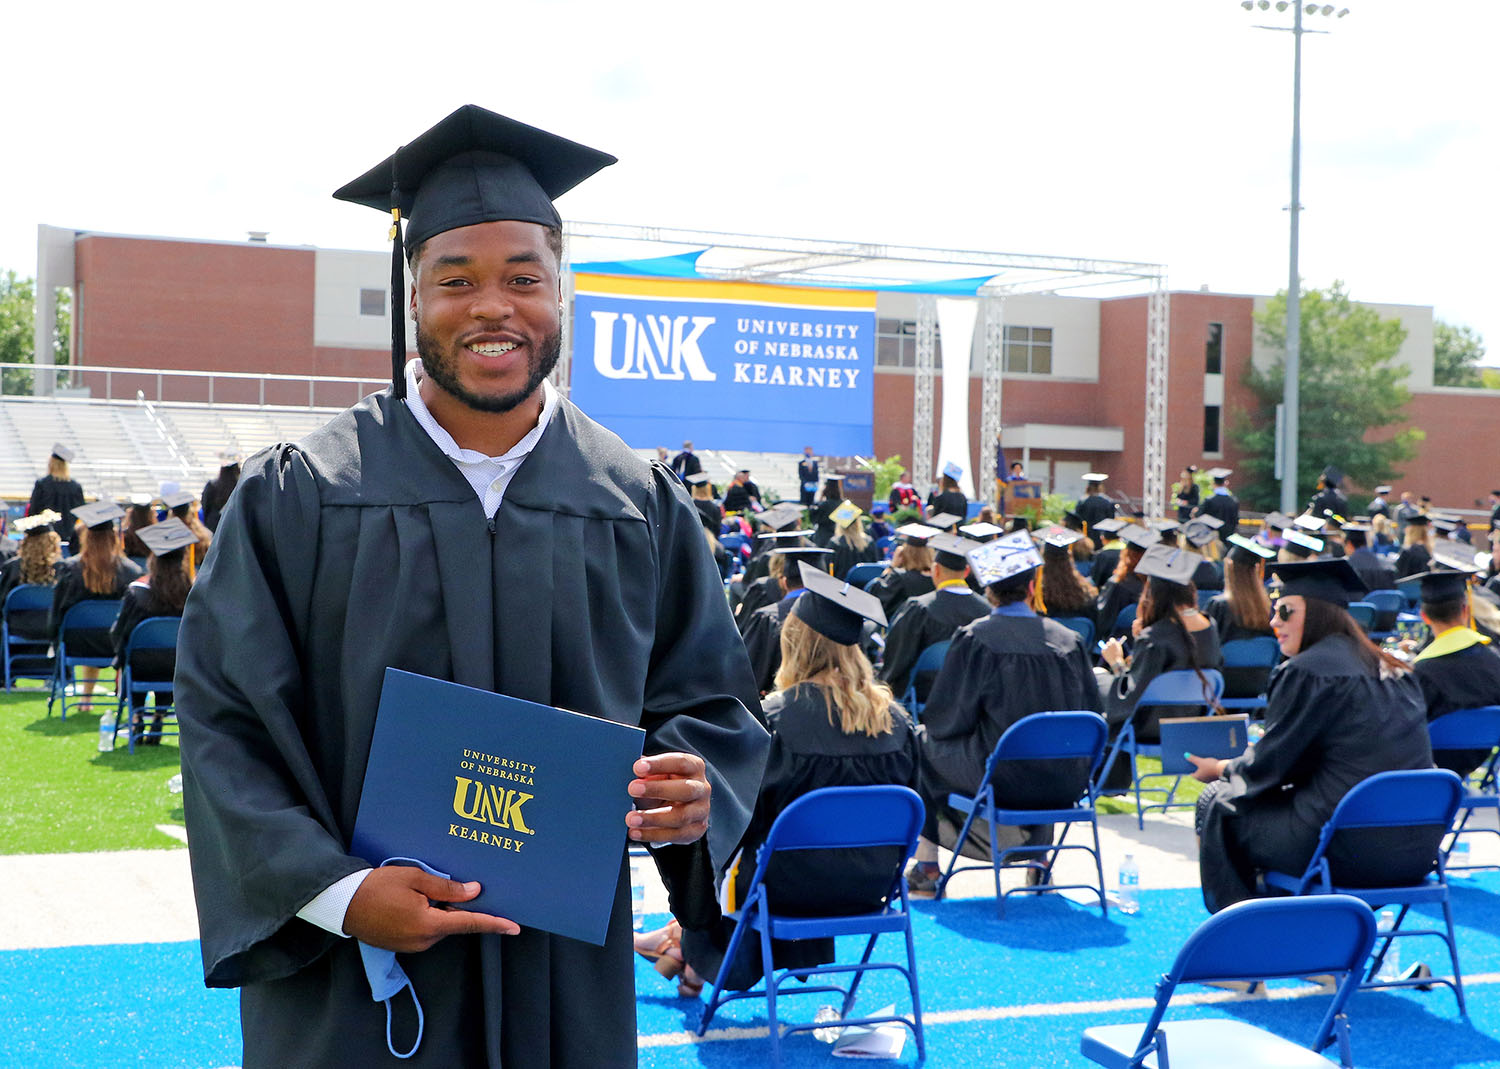 Rakid Hill’s family traveled from St. Louis, Missouri, to watch him receive his degree during Friday’s commencement ceremony at UNK. “My mom and dad wanted to see me walk,” Hill said. “I’m their first kid to graduate from a university, so that was big for them.” (Photos by Todd Gottula, UNK Communications)